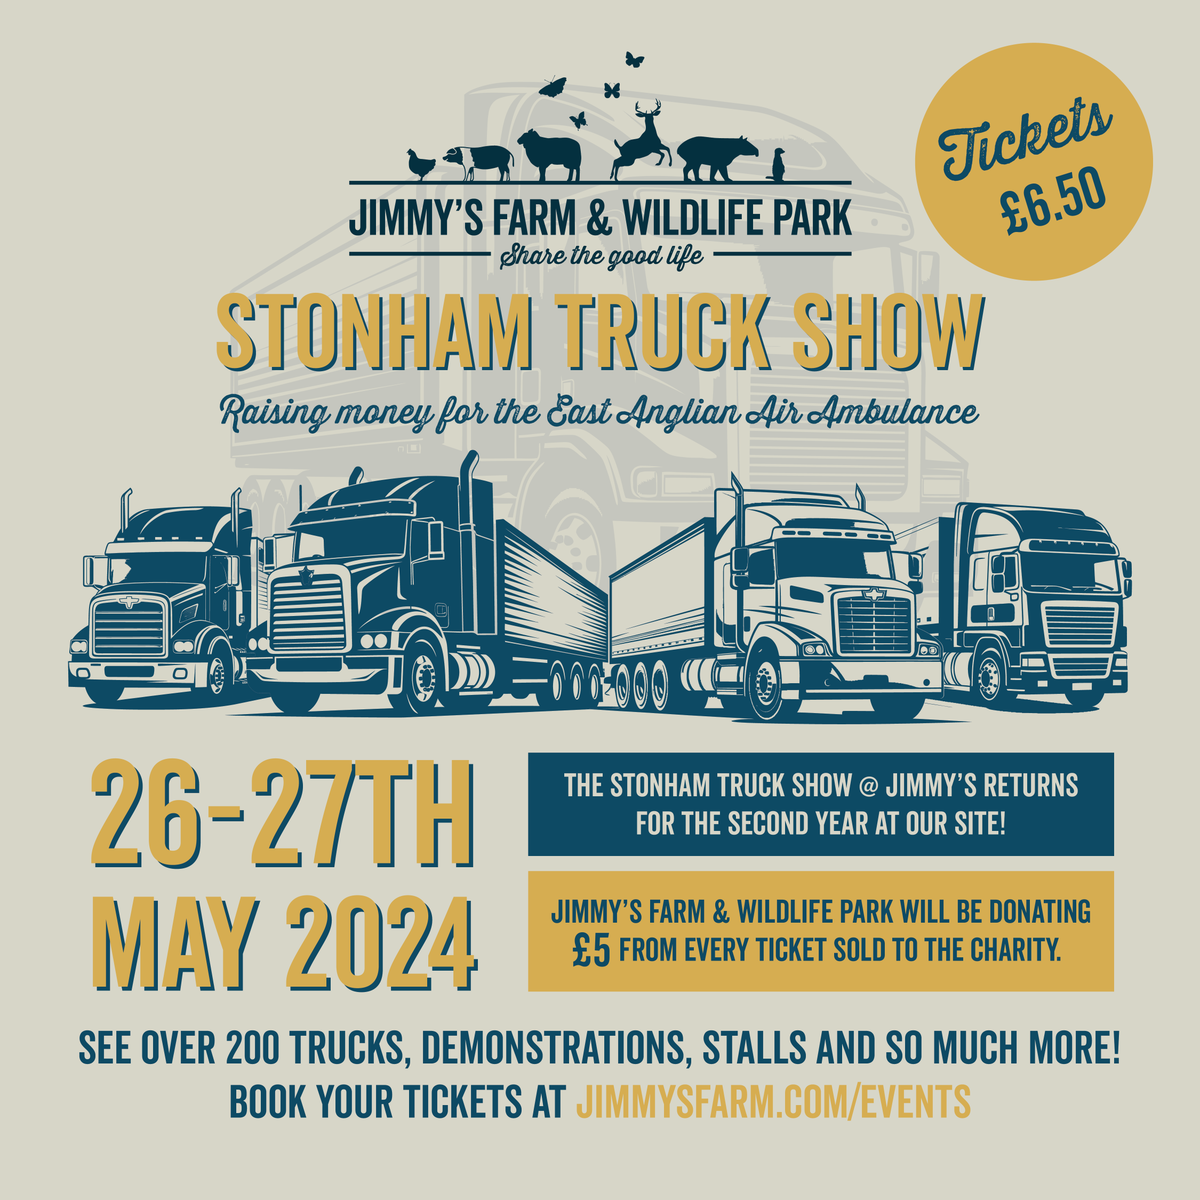 The Stonham Truck Show kicks off this Sunday 27th and the setup has begun! 🚚🚛 If you haven't got your tickets yet, you can get them through our website -jimmysfarm.com/event/stonham-… #TruckShow #JimmysFarm #BankHoliday